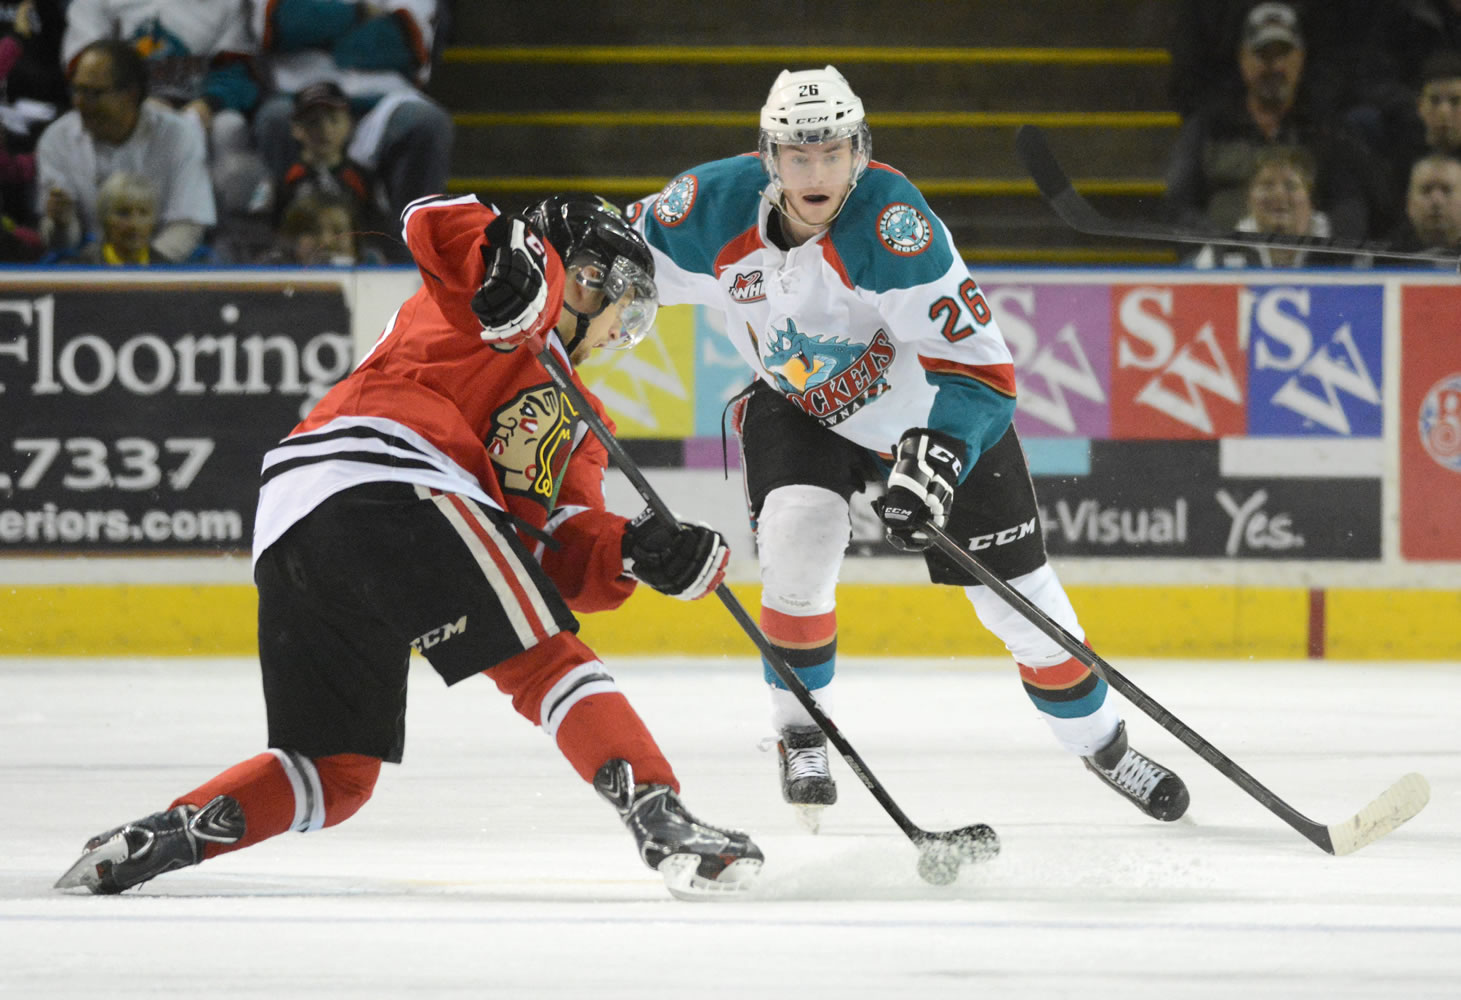 Kelowna Rockets, Cole Linaker tries to steel the puck away from Portland Winterhawks, Brendan Leipsic on a power play opportunity for the hawks during WHL first period game 5 play off action at Prospera Place on Friday evening.